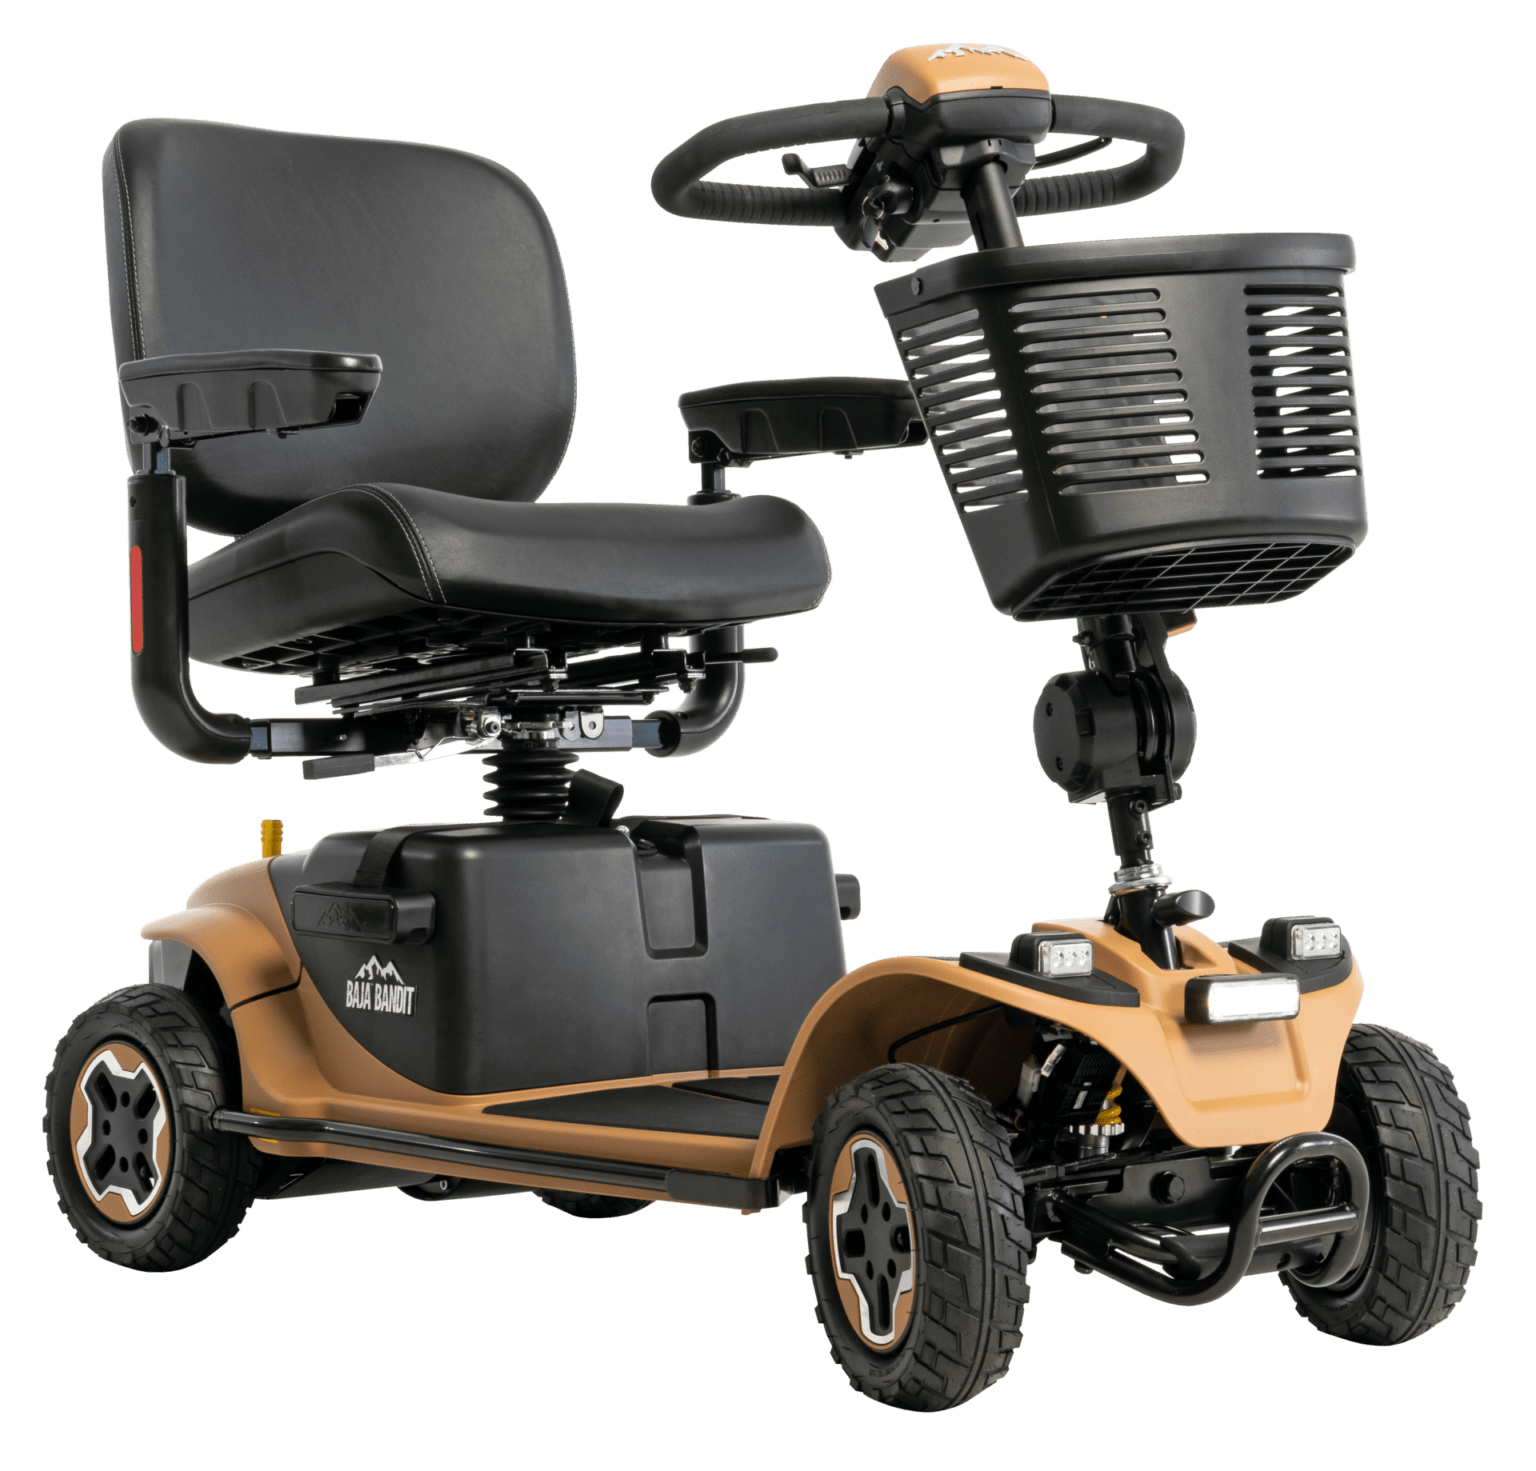 Baja Bandit Offroad Reisescooter 12 km/h - Clevr Mobility